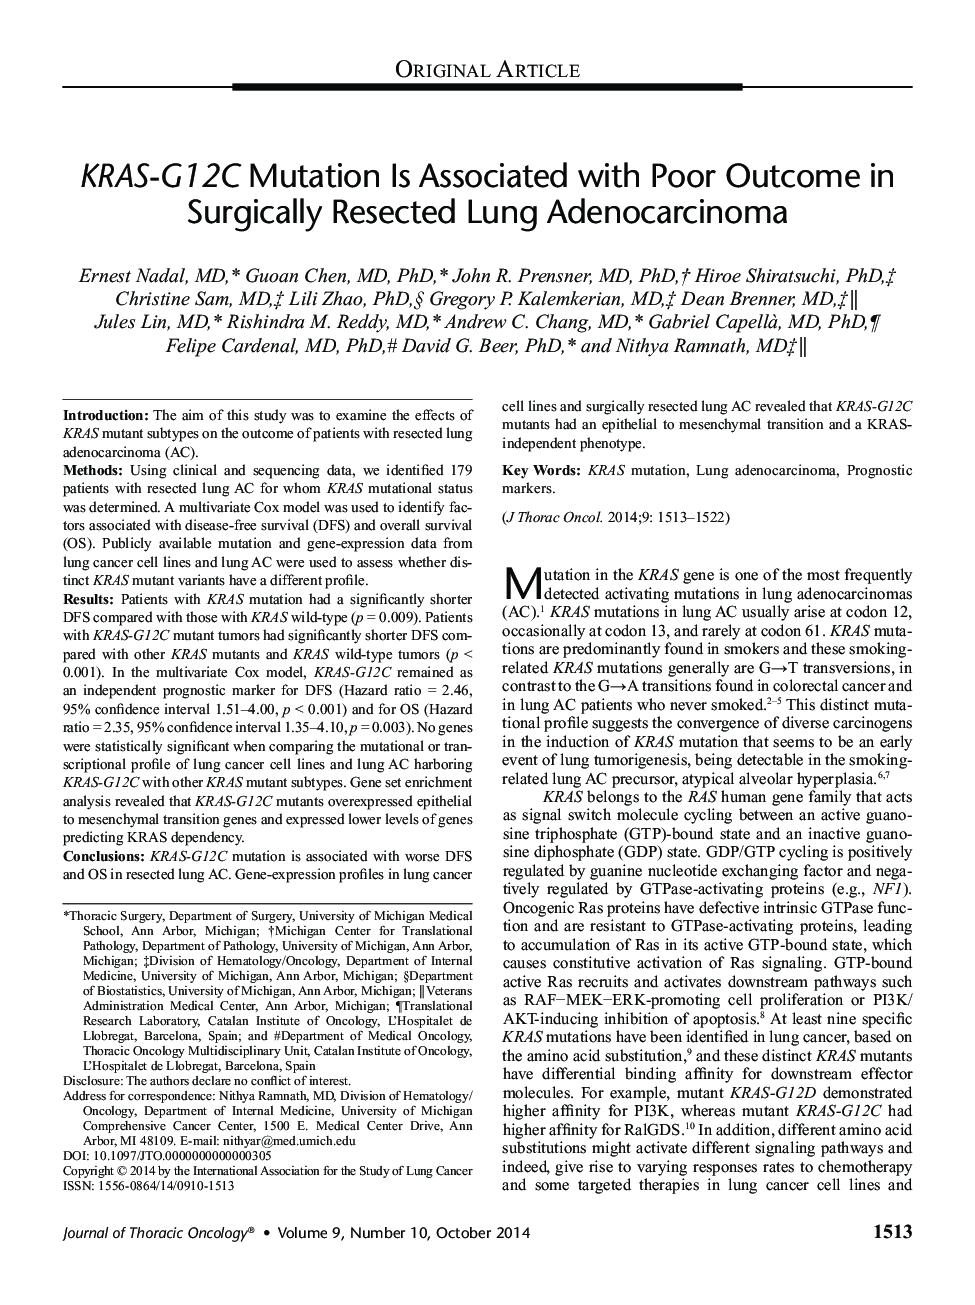 KRAS-G12C Mutation Is Associated with Poor Outcome in Surgically Resected Lung Adenocarcinoma